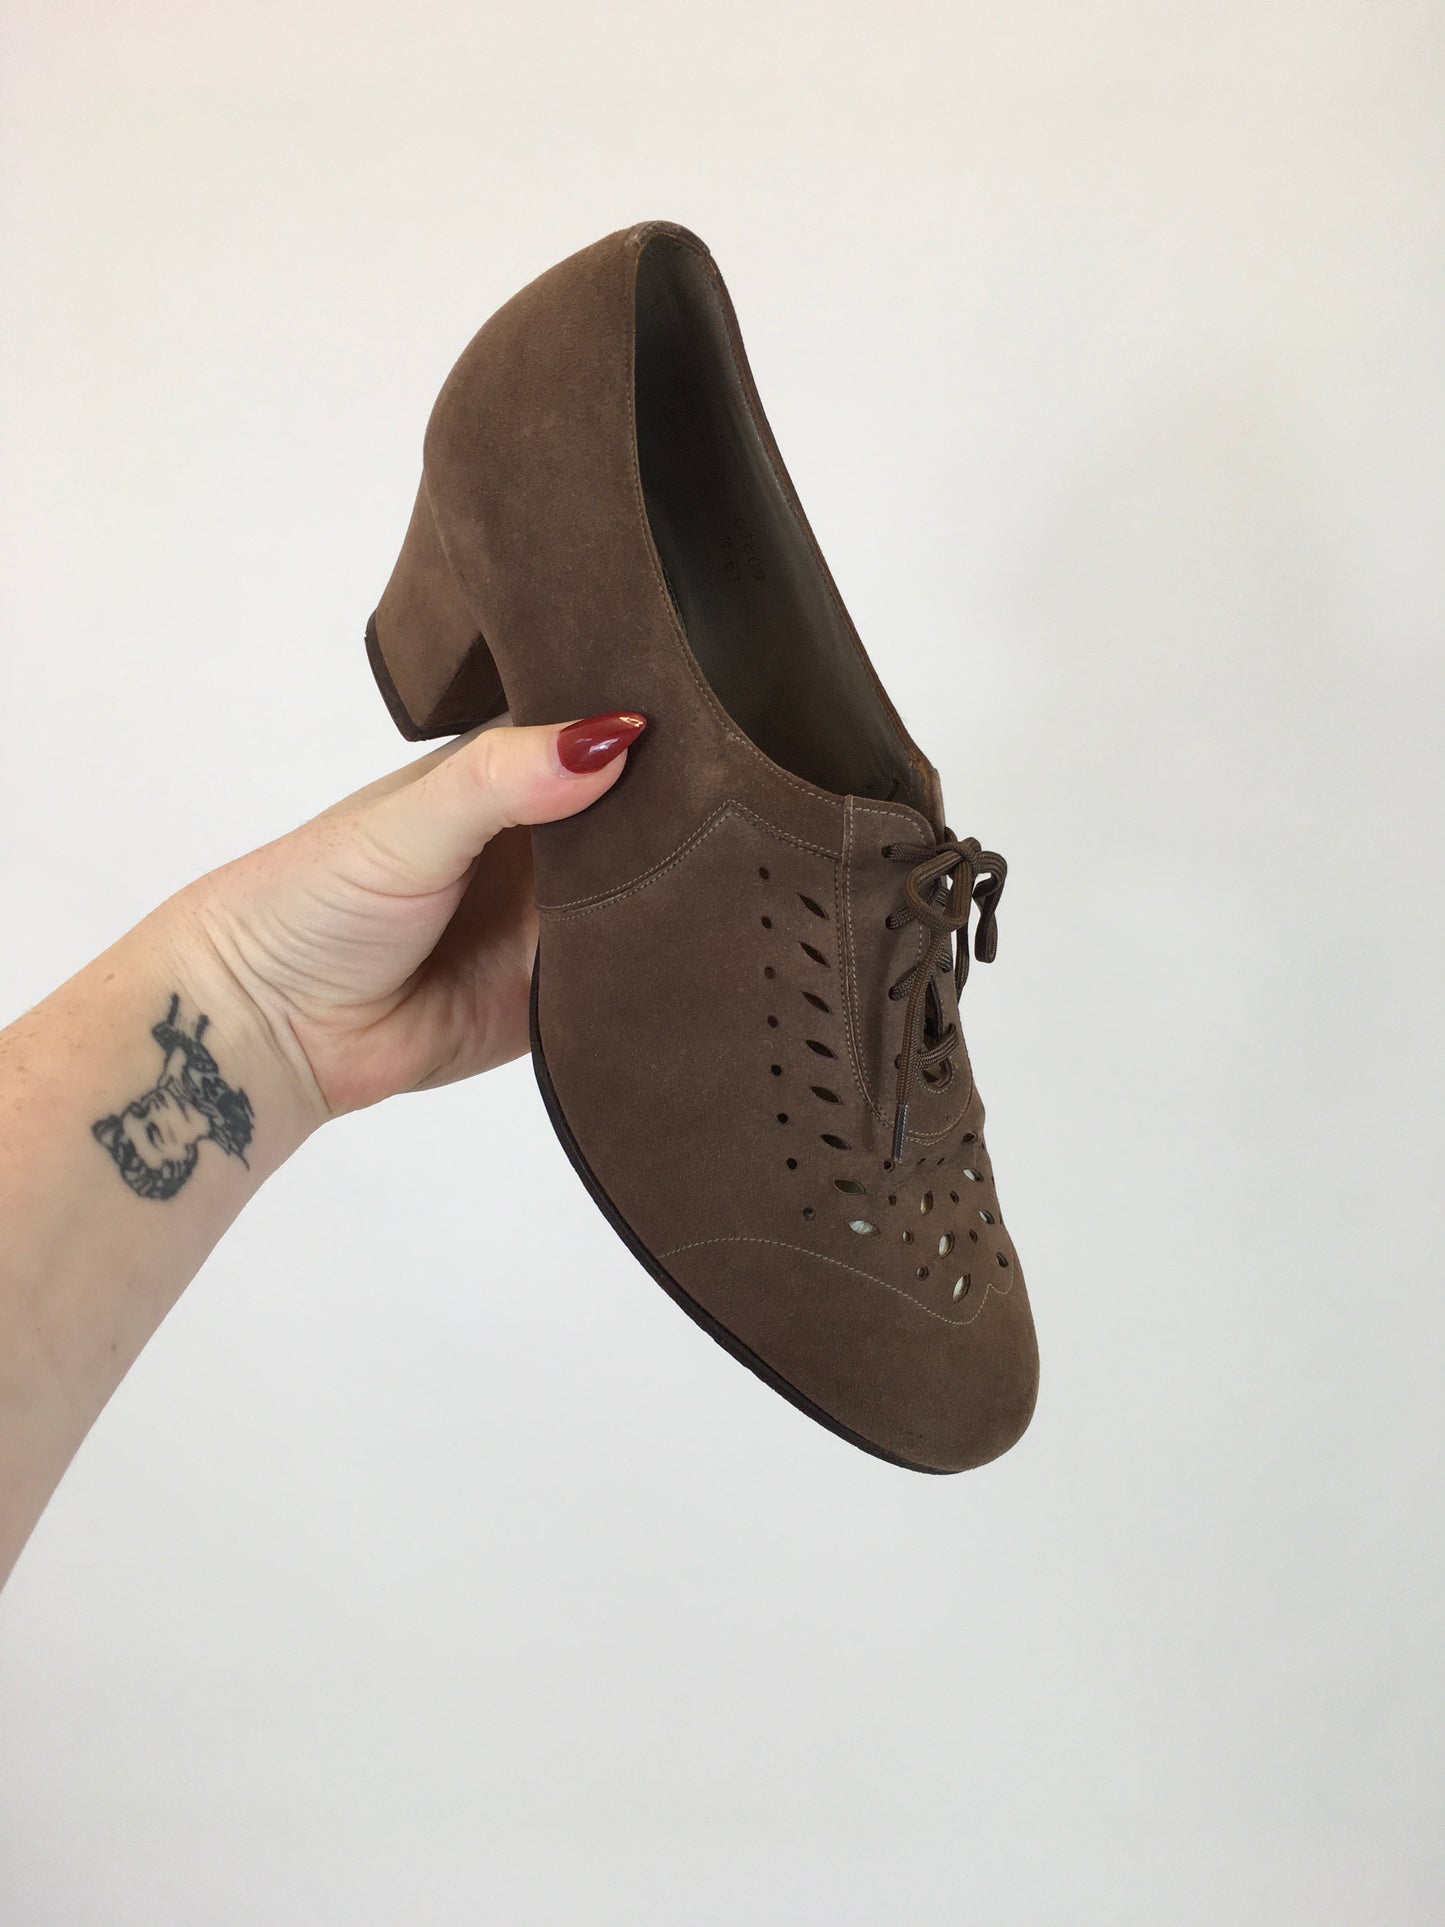 Original 1940's Darling Suede Lace Up Shoes - In A Soft Brown With Lovely Details (Approx Size UK 7)